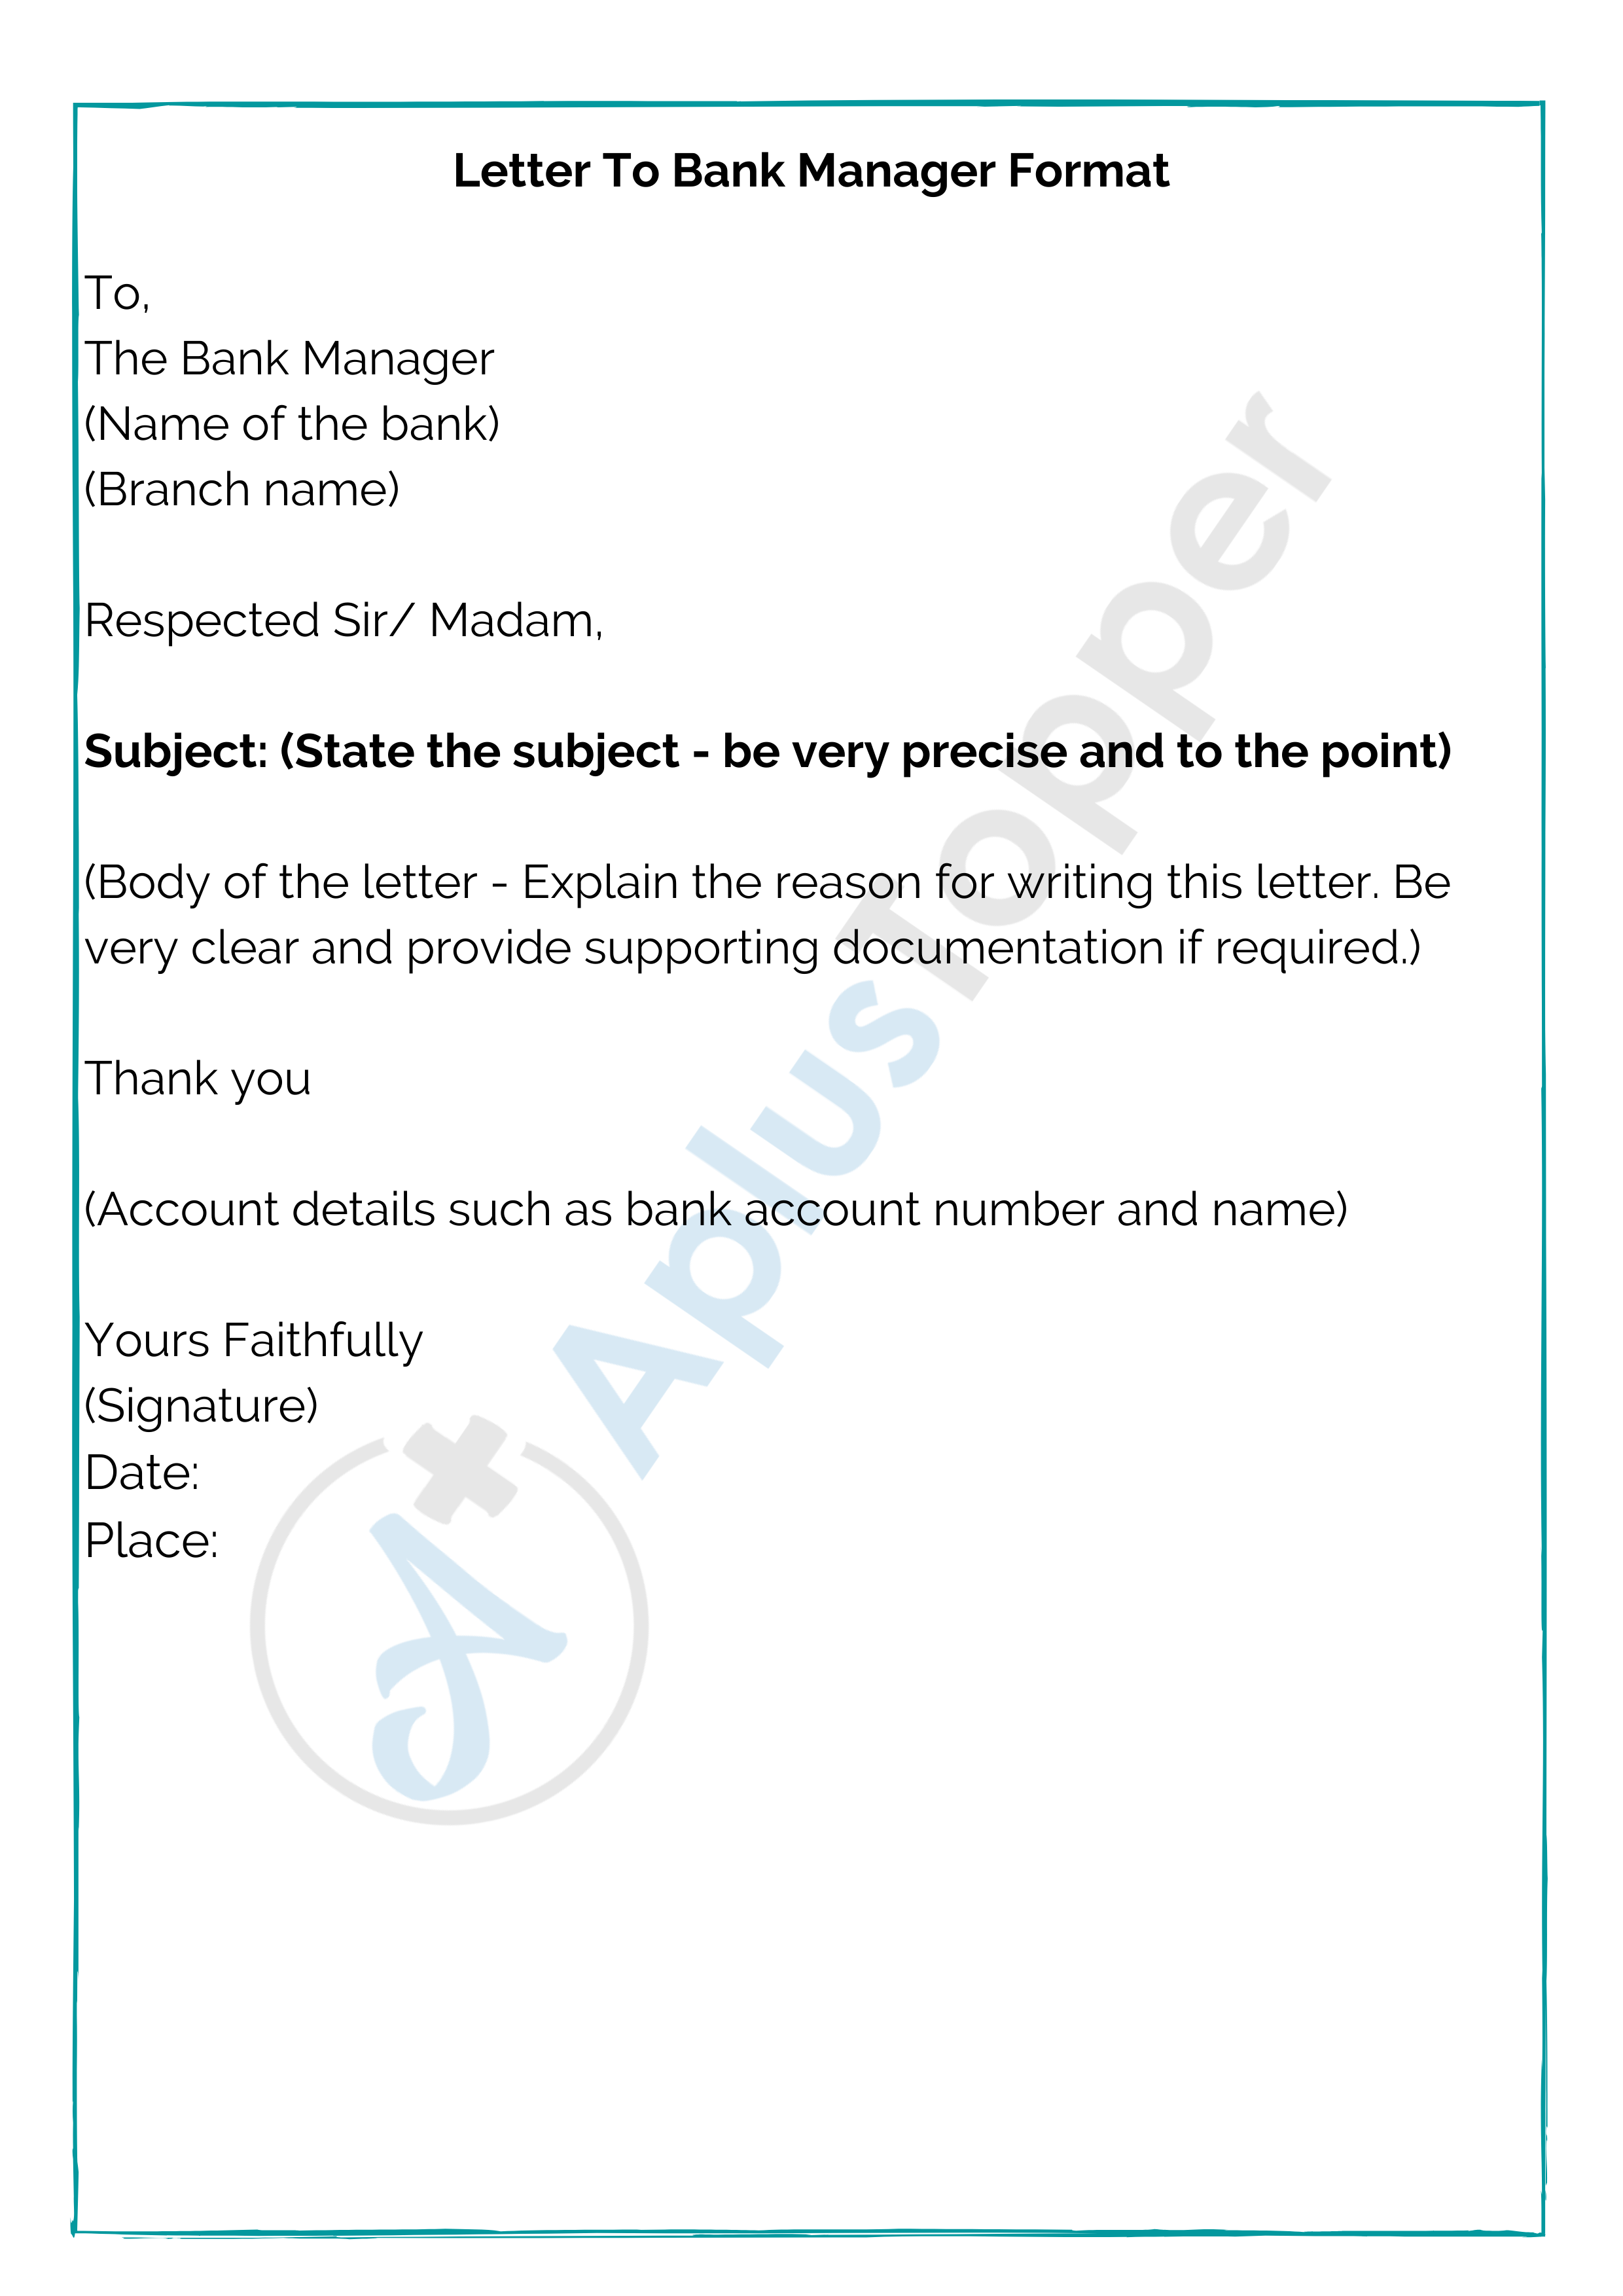 Letter To Bank Manager Format Sample Tips And Guidelines On How To Write A Letter To Bank Manager A Plus Topper